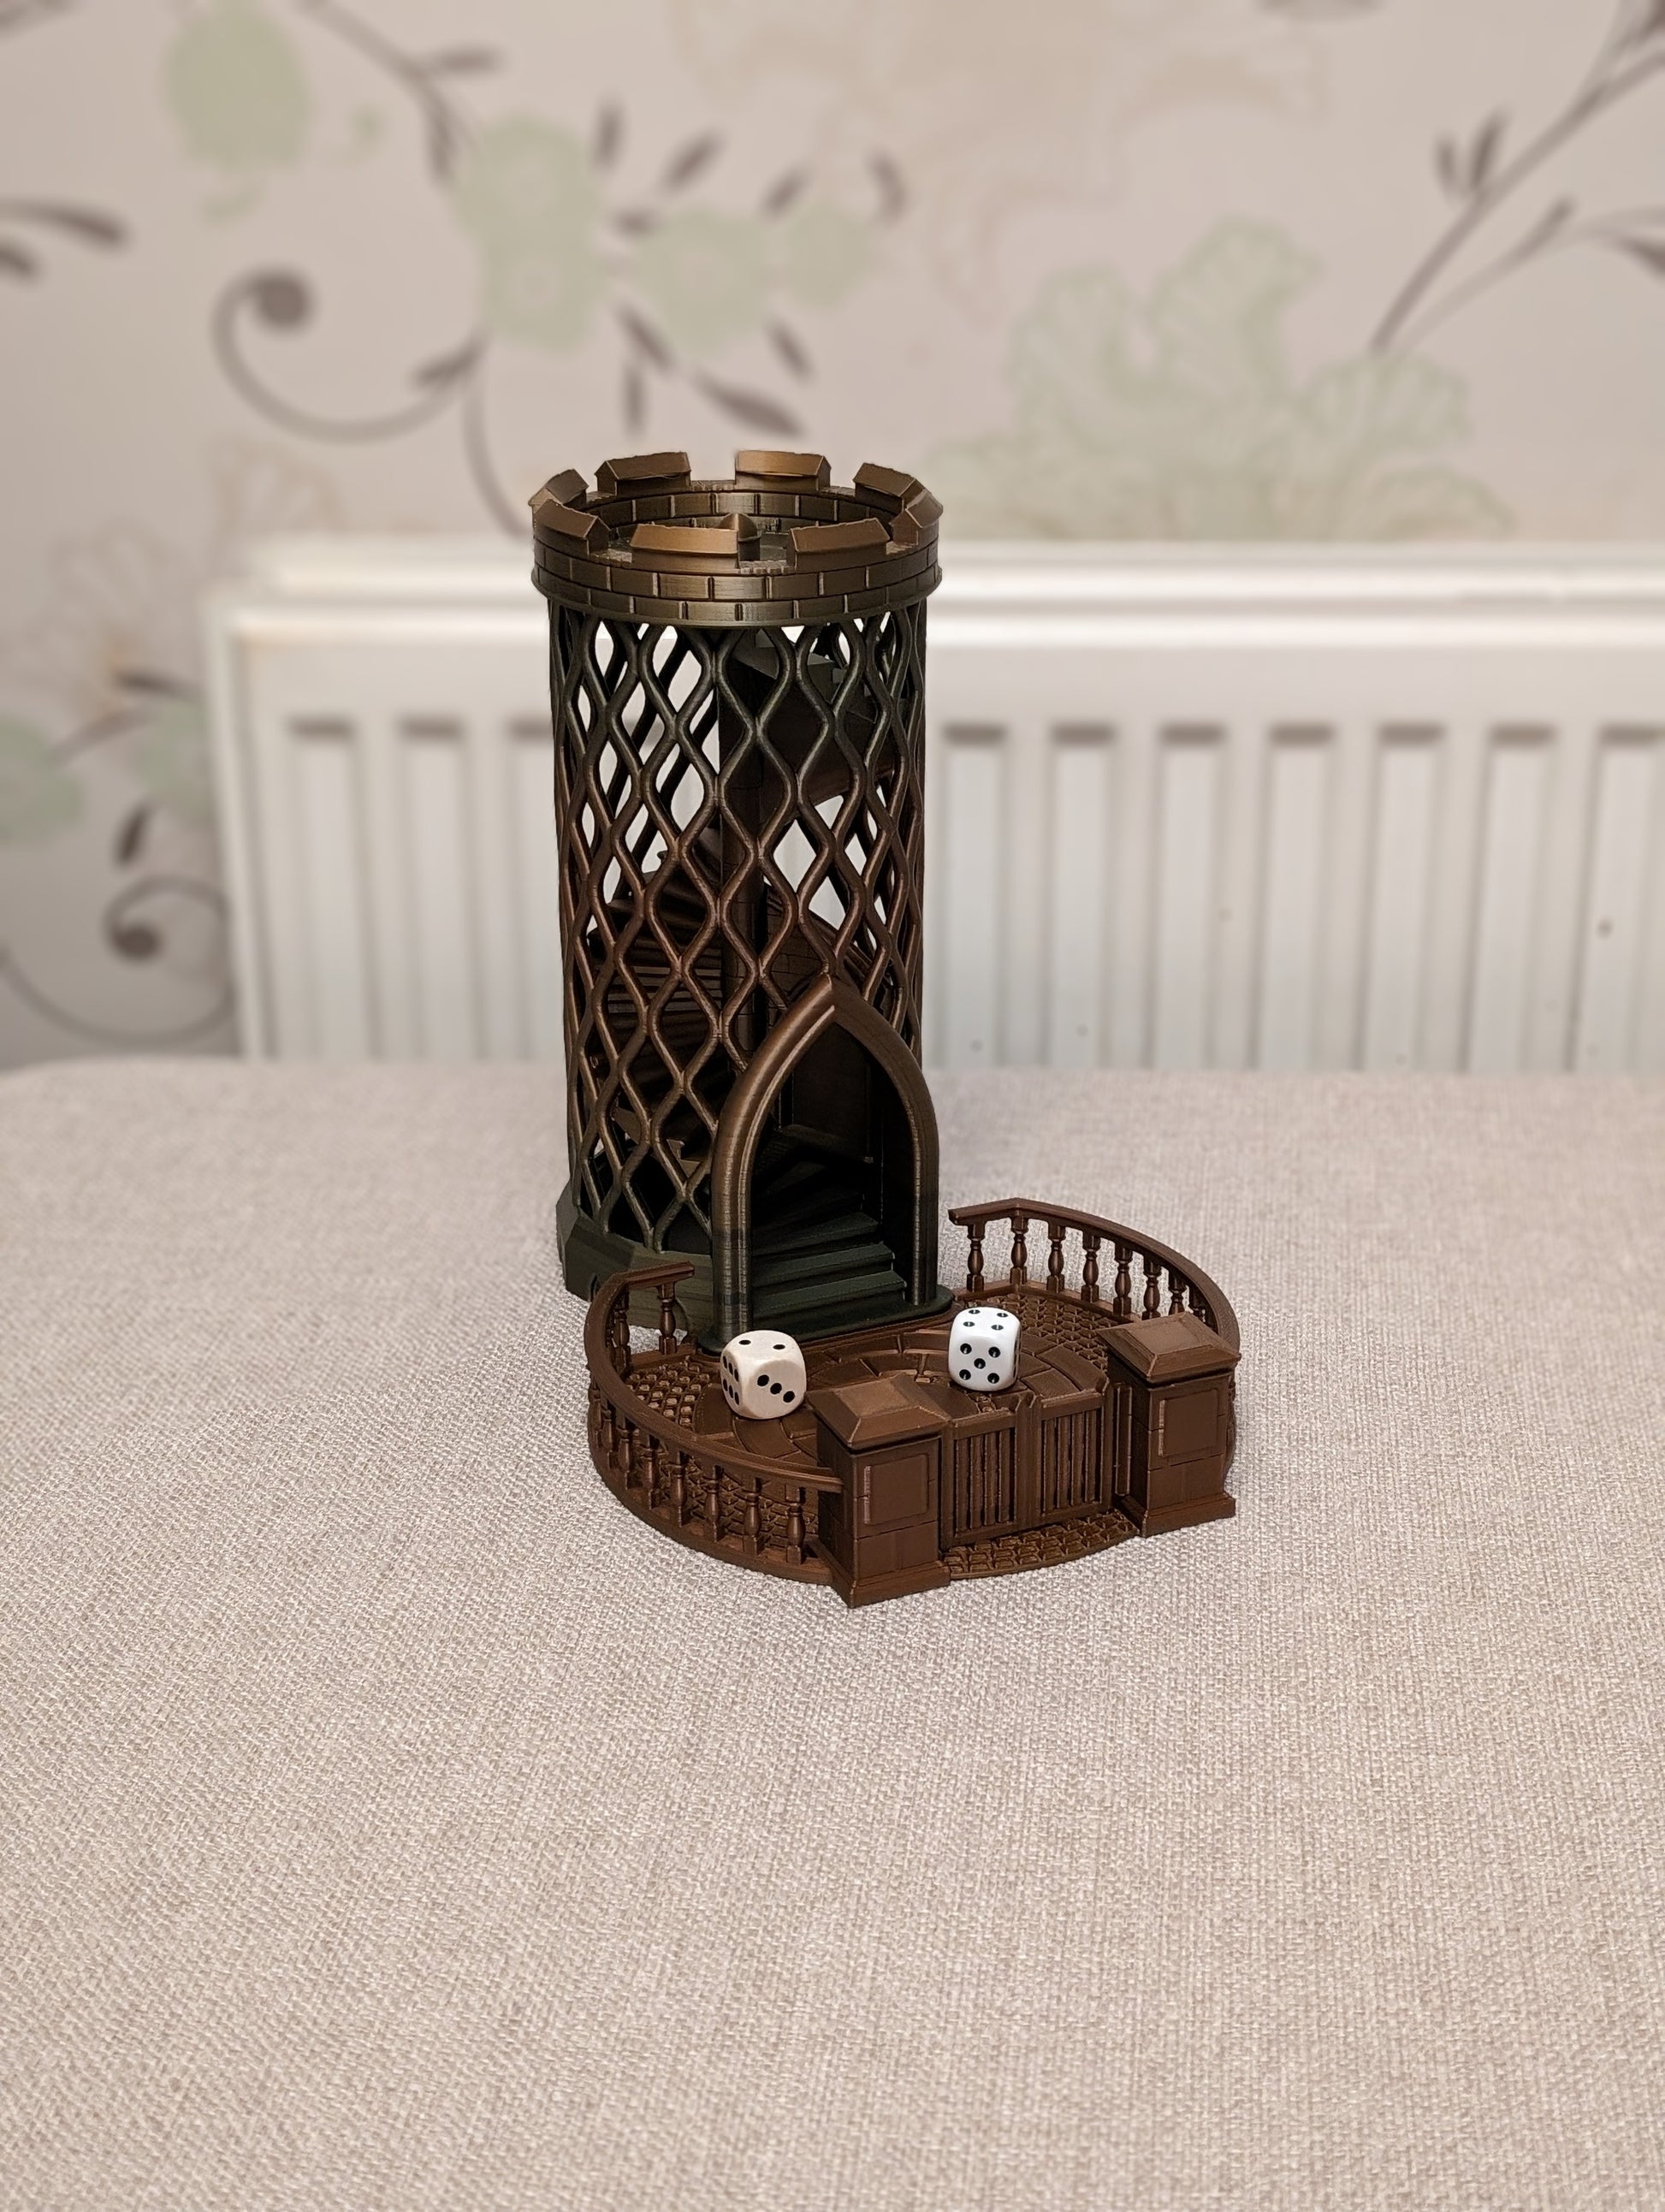 Castle turret dice tower from front side angle